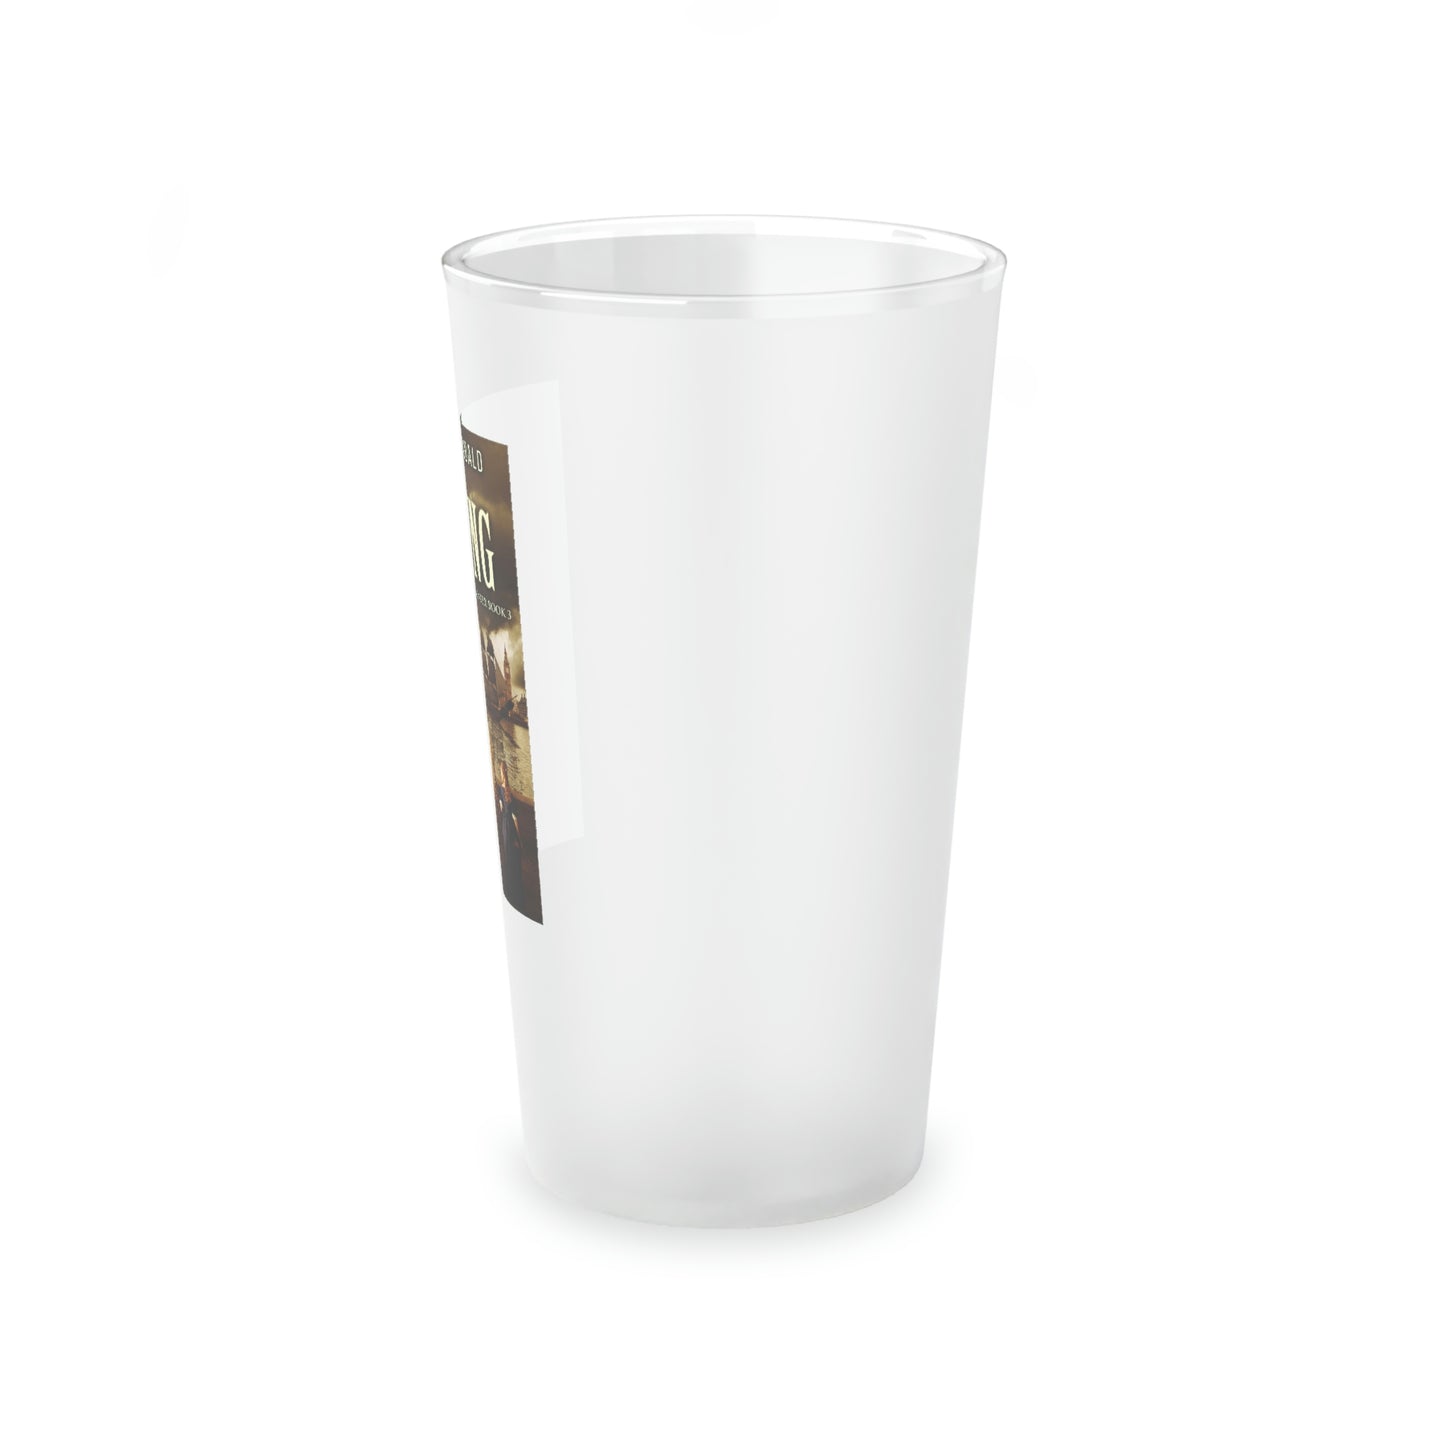 Reigning - Frosted Pint Glass